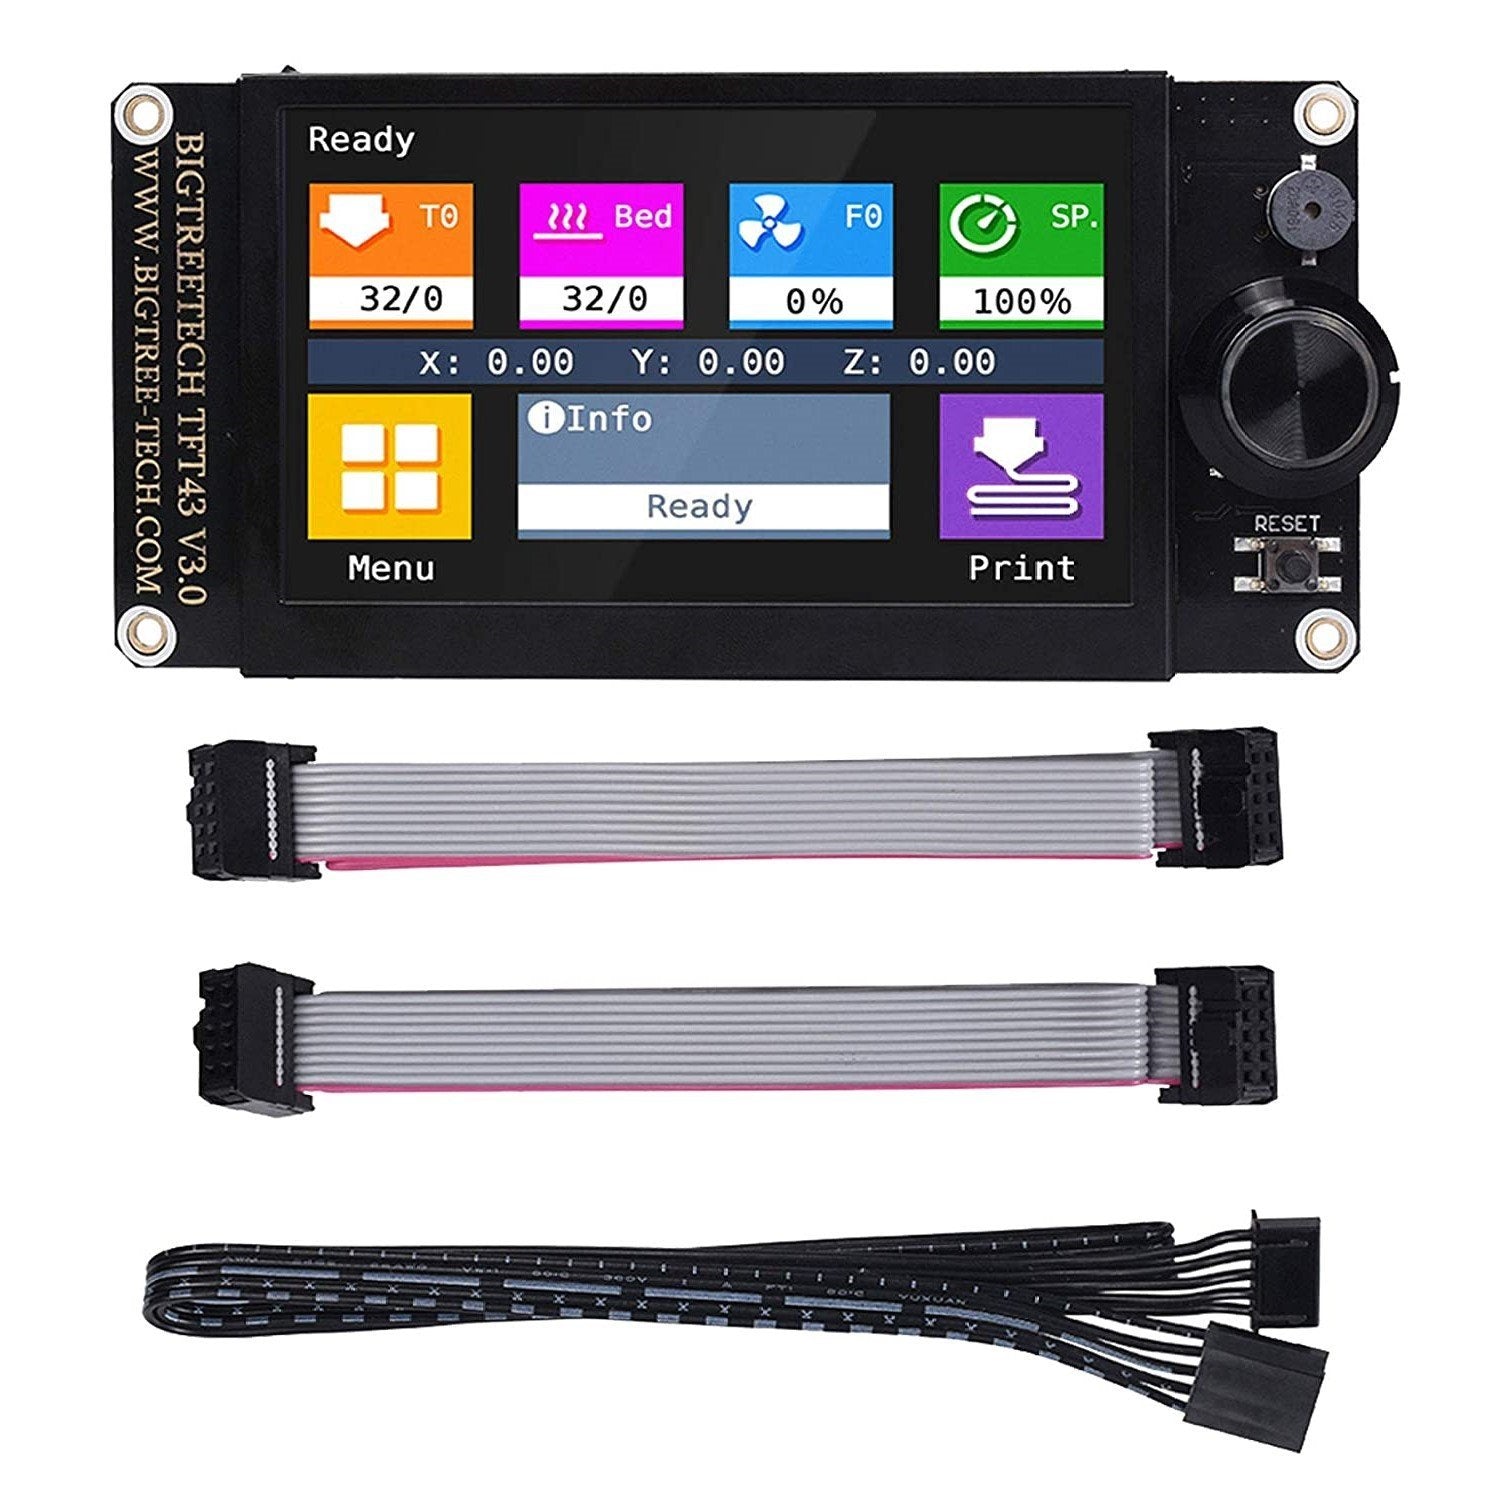 BIGTREETECH® TFT43 V3.0 Smart Graphic LCD Display Controller